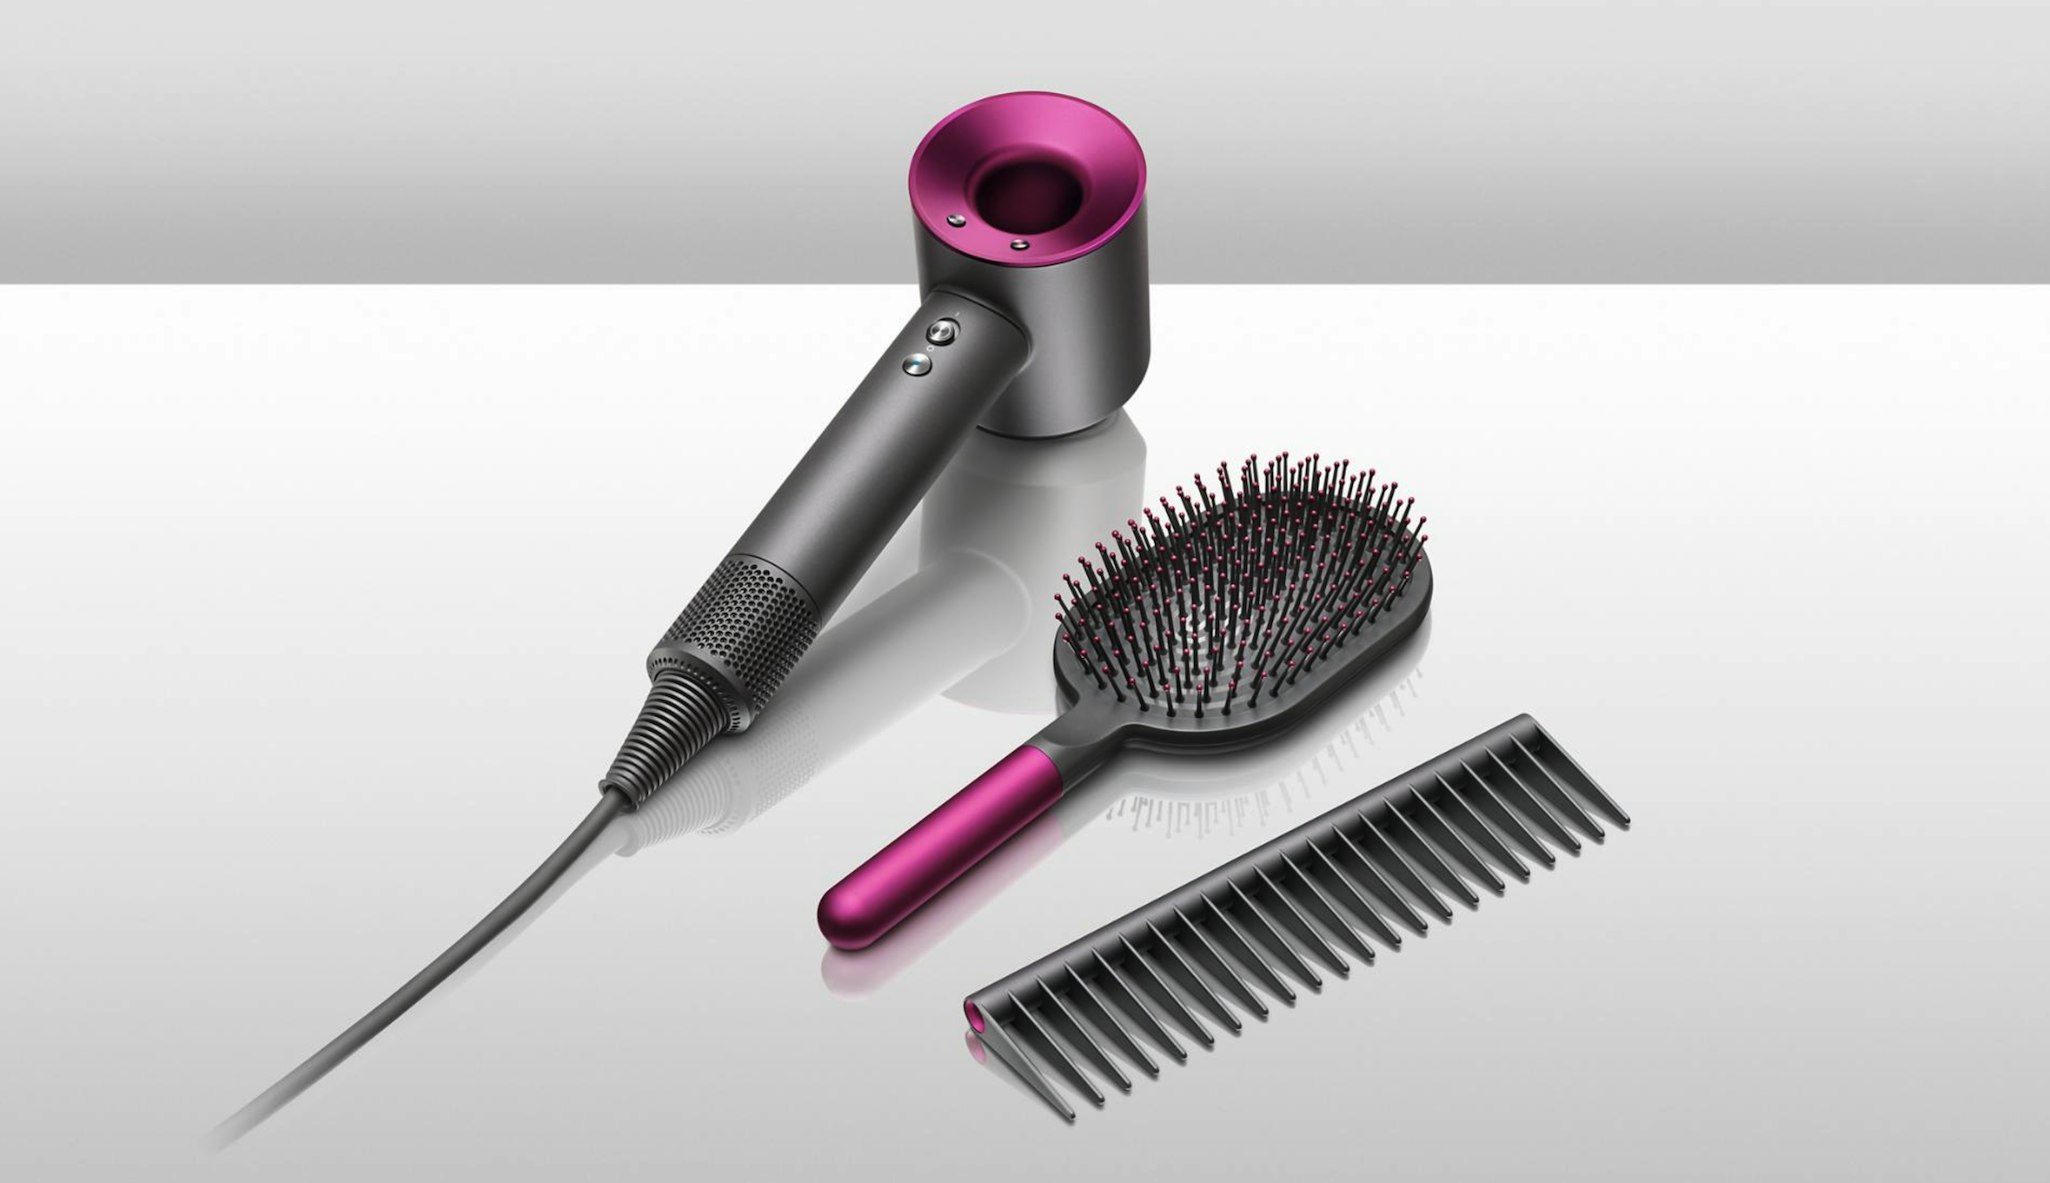 This Dyson hairdryer dupe costs just £20